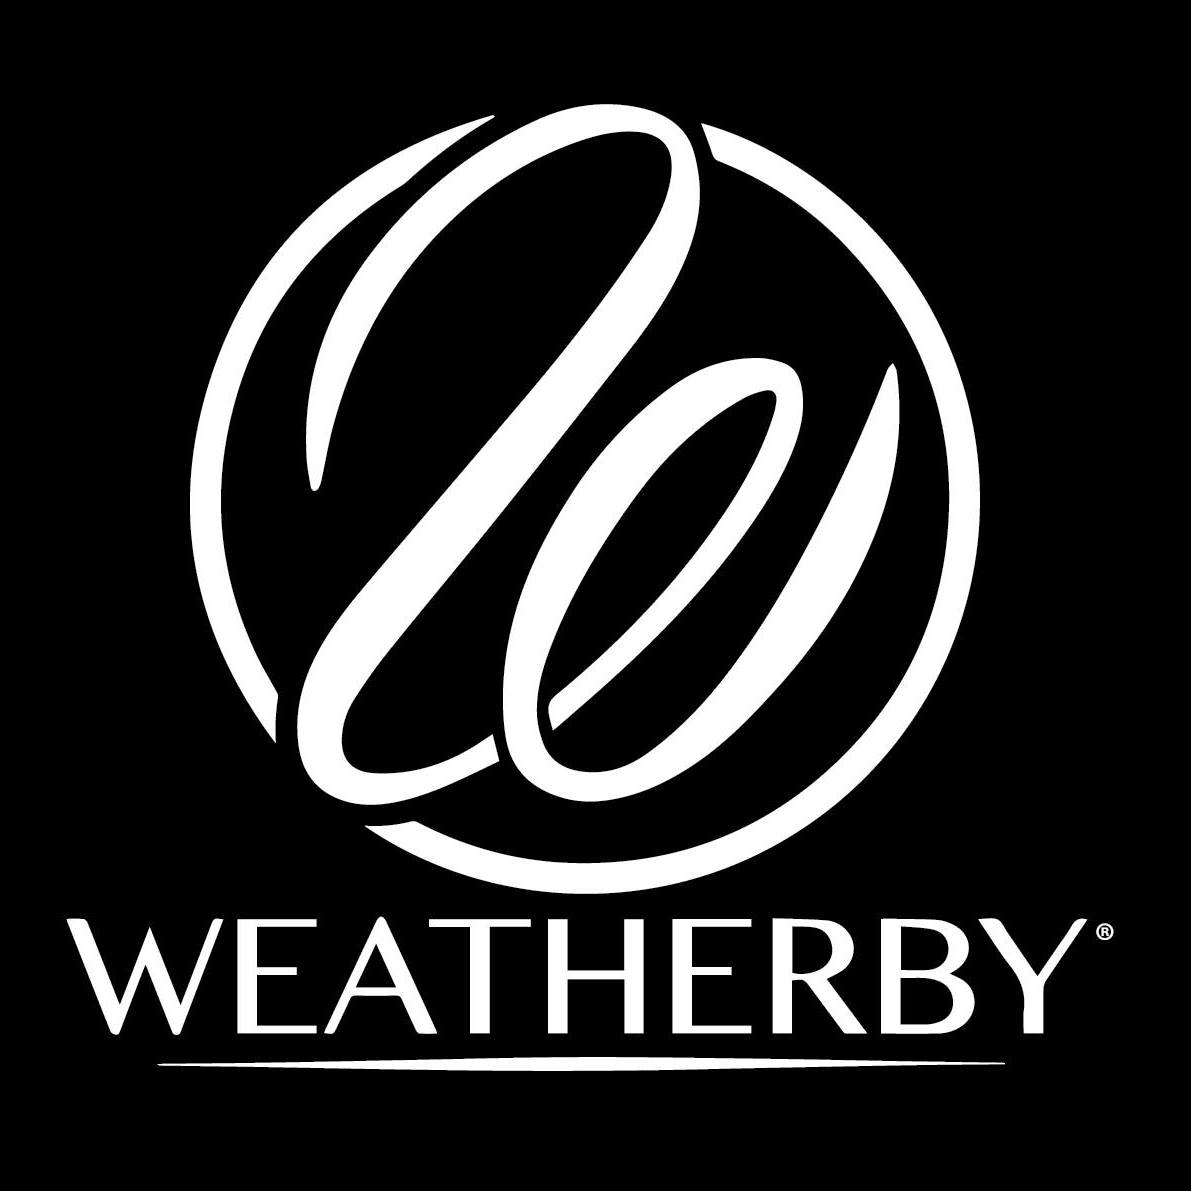 WEATHERBY